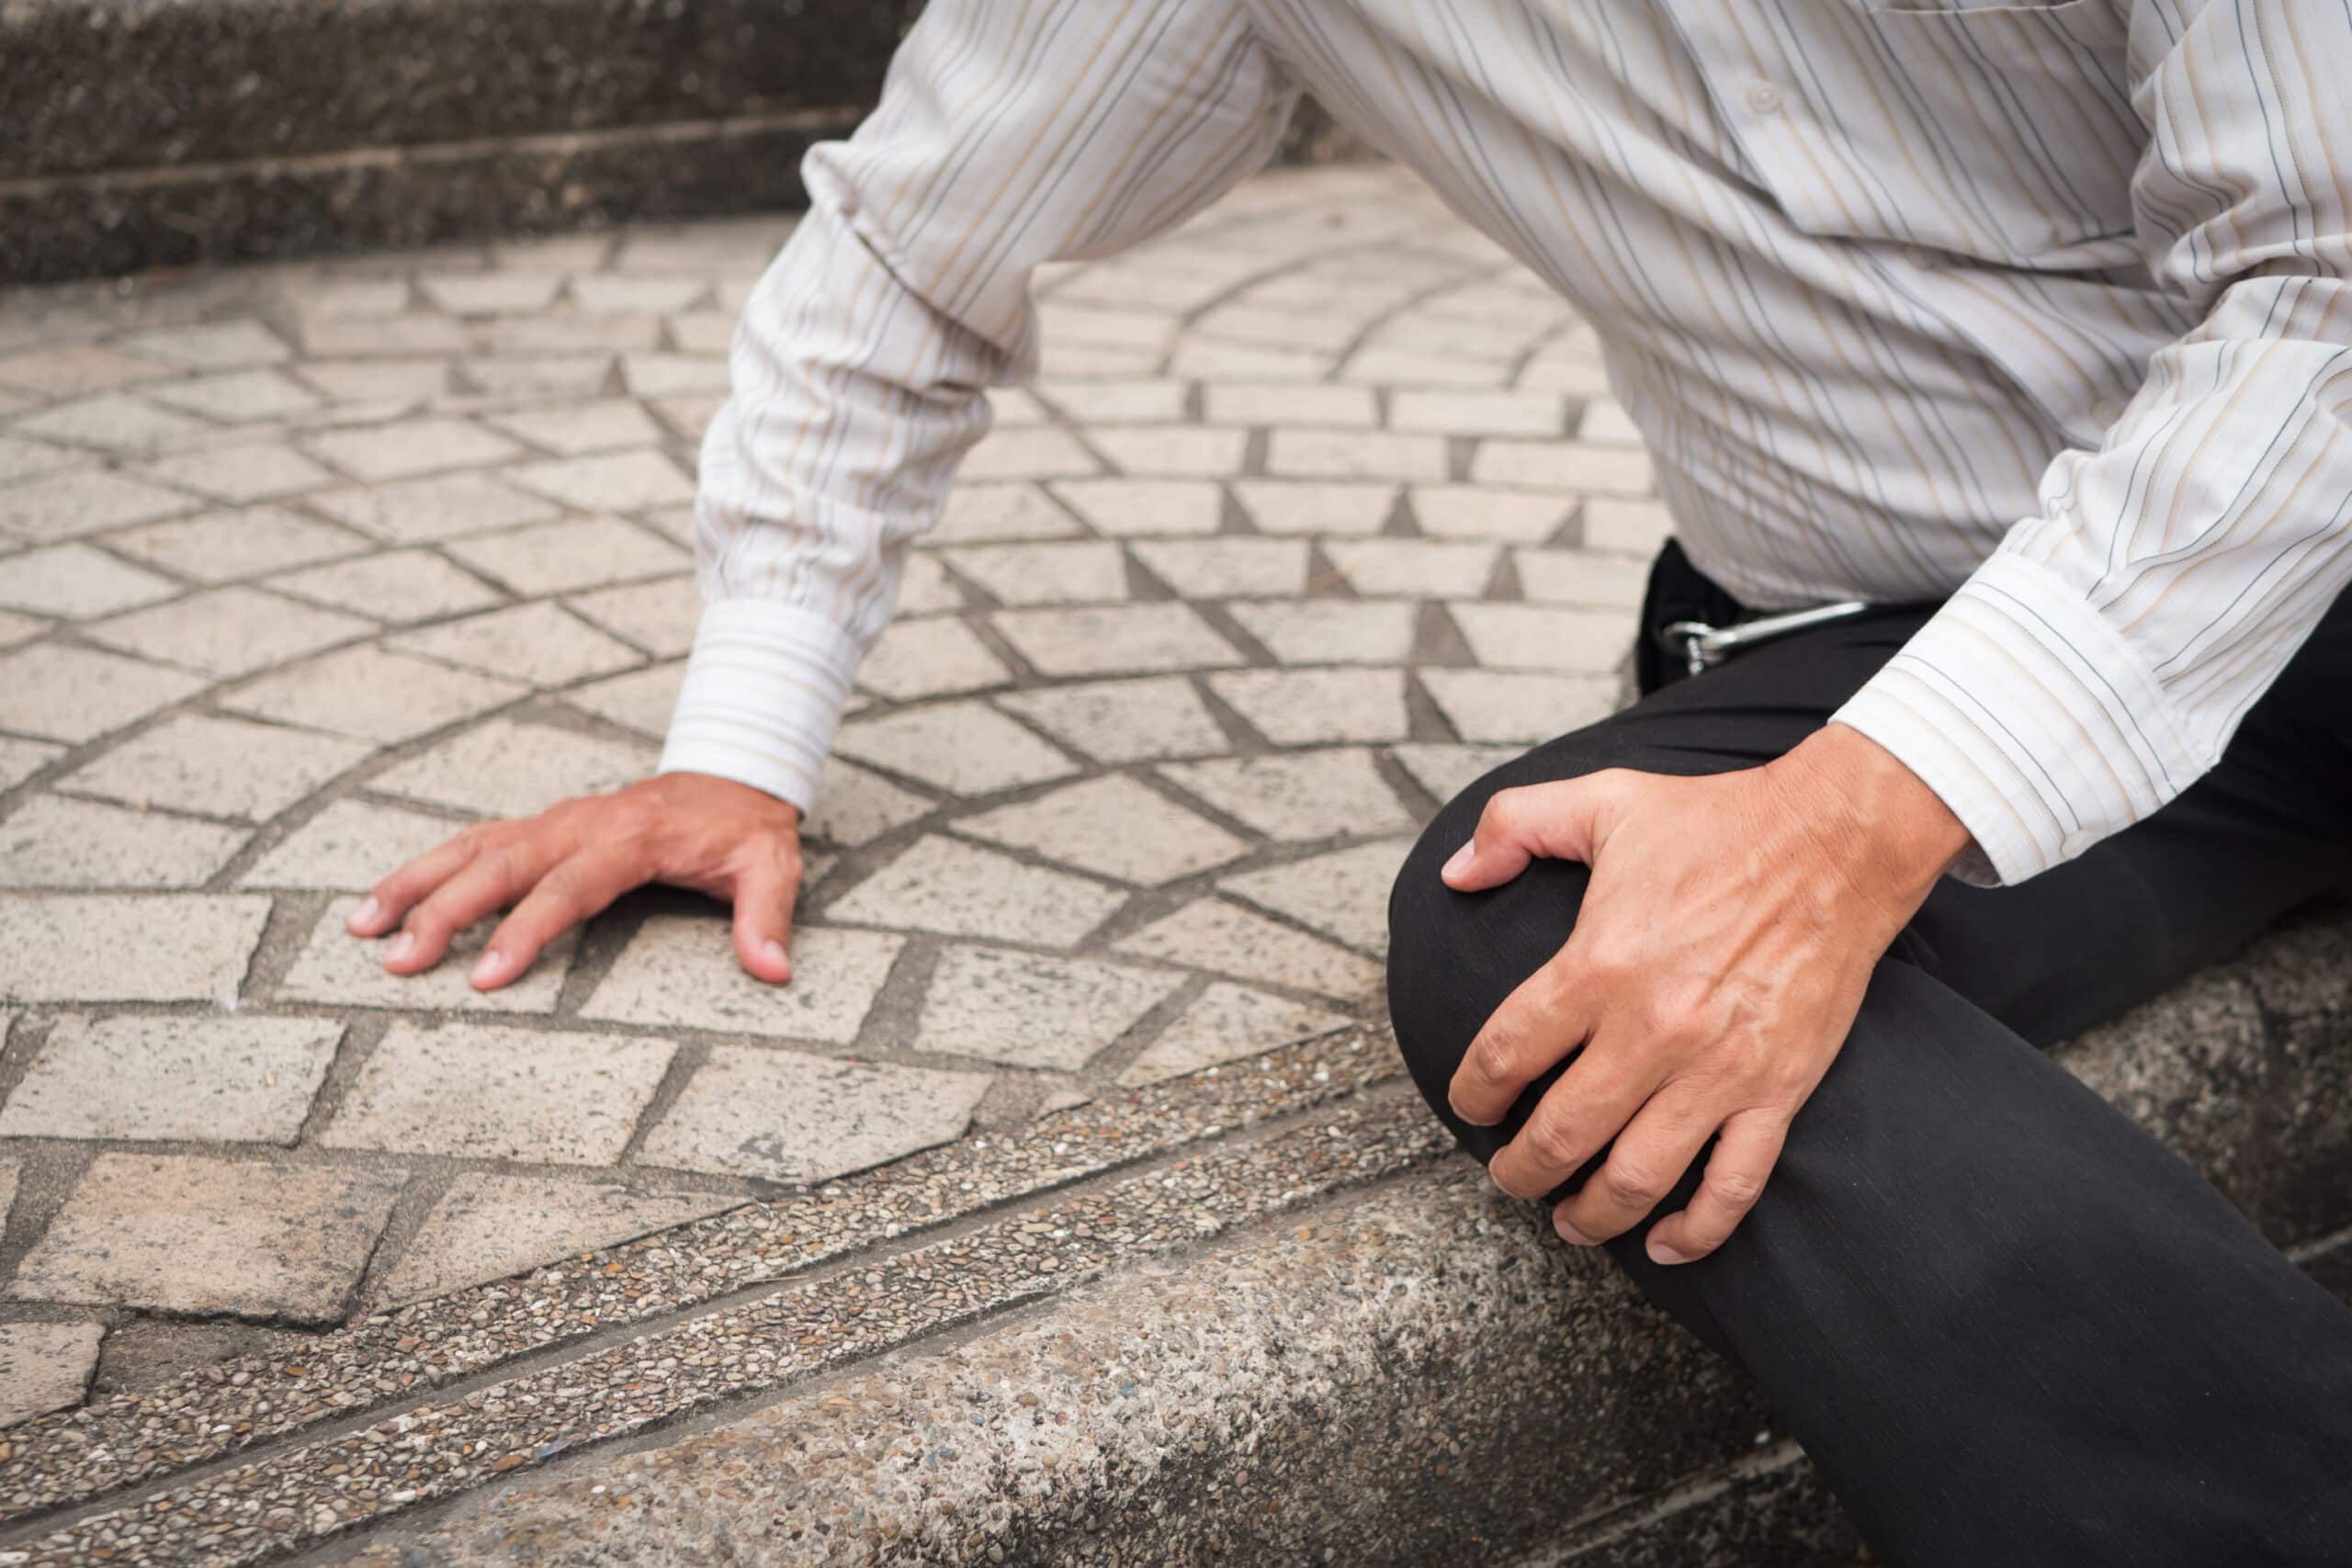 who-is-responsible-for-slip-and-fall-accidents-in-public-places